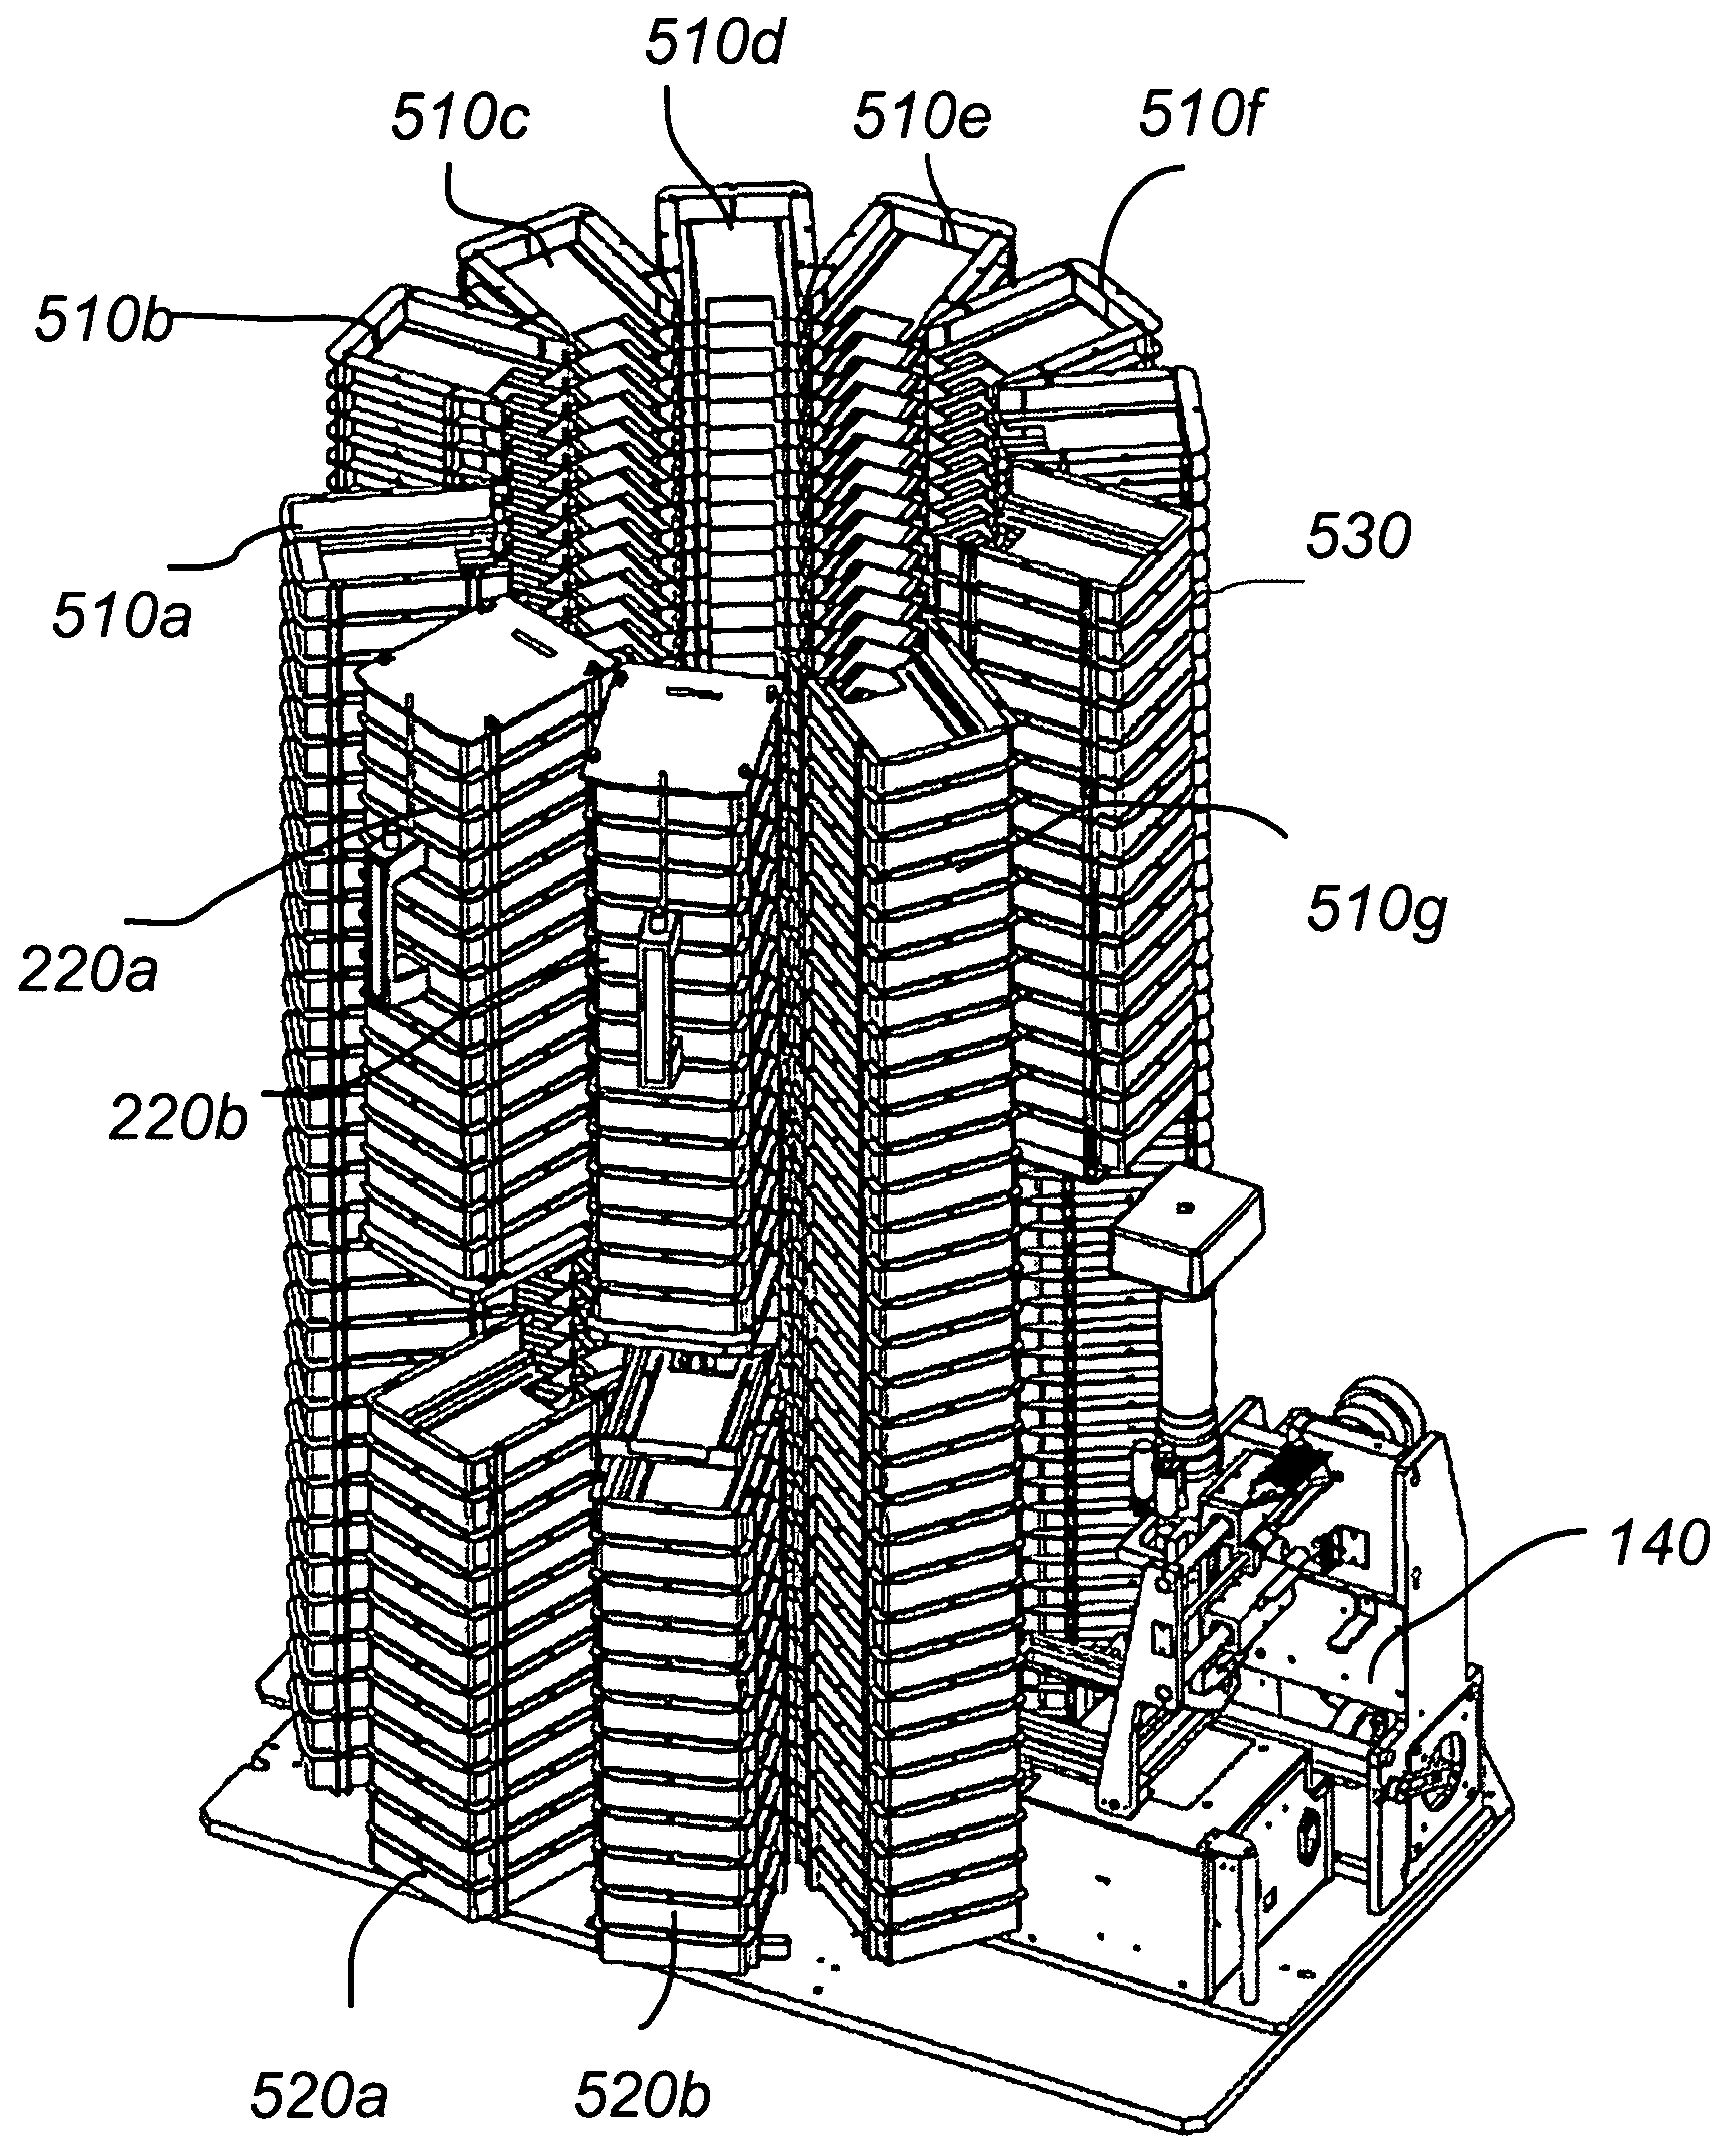 Automated sample analysis system and method